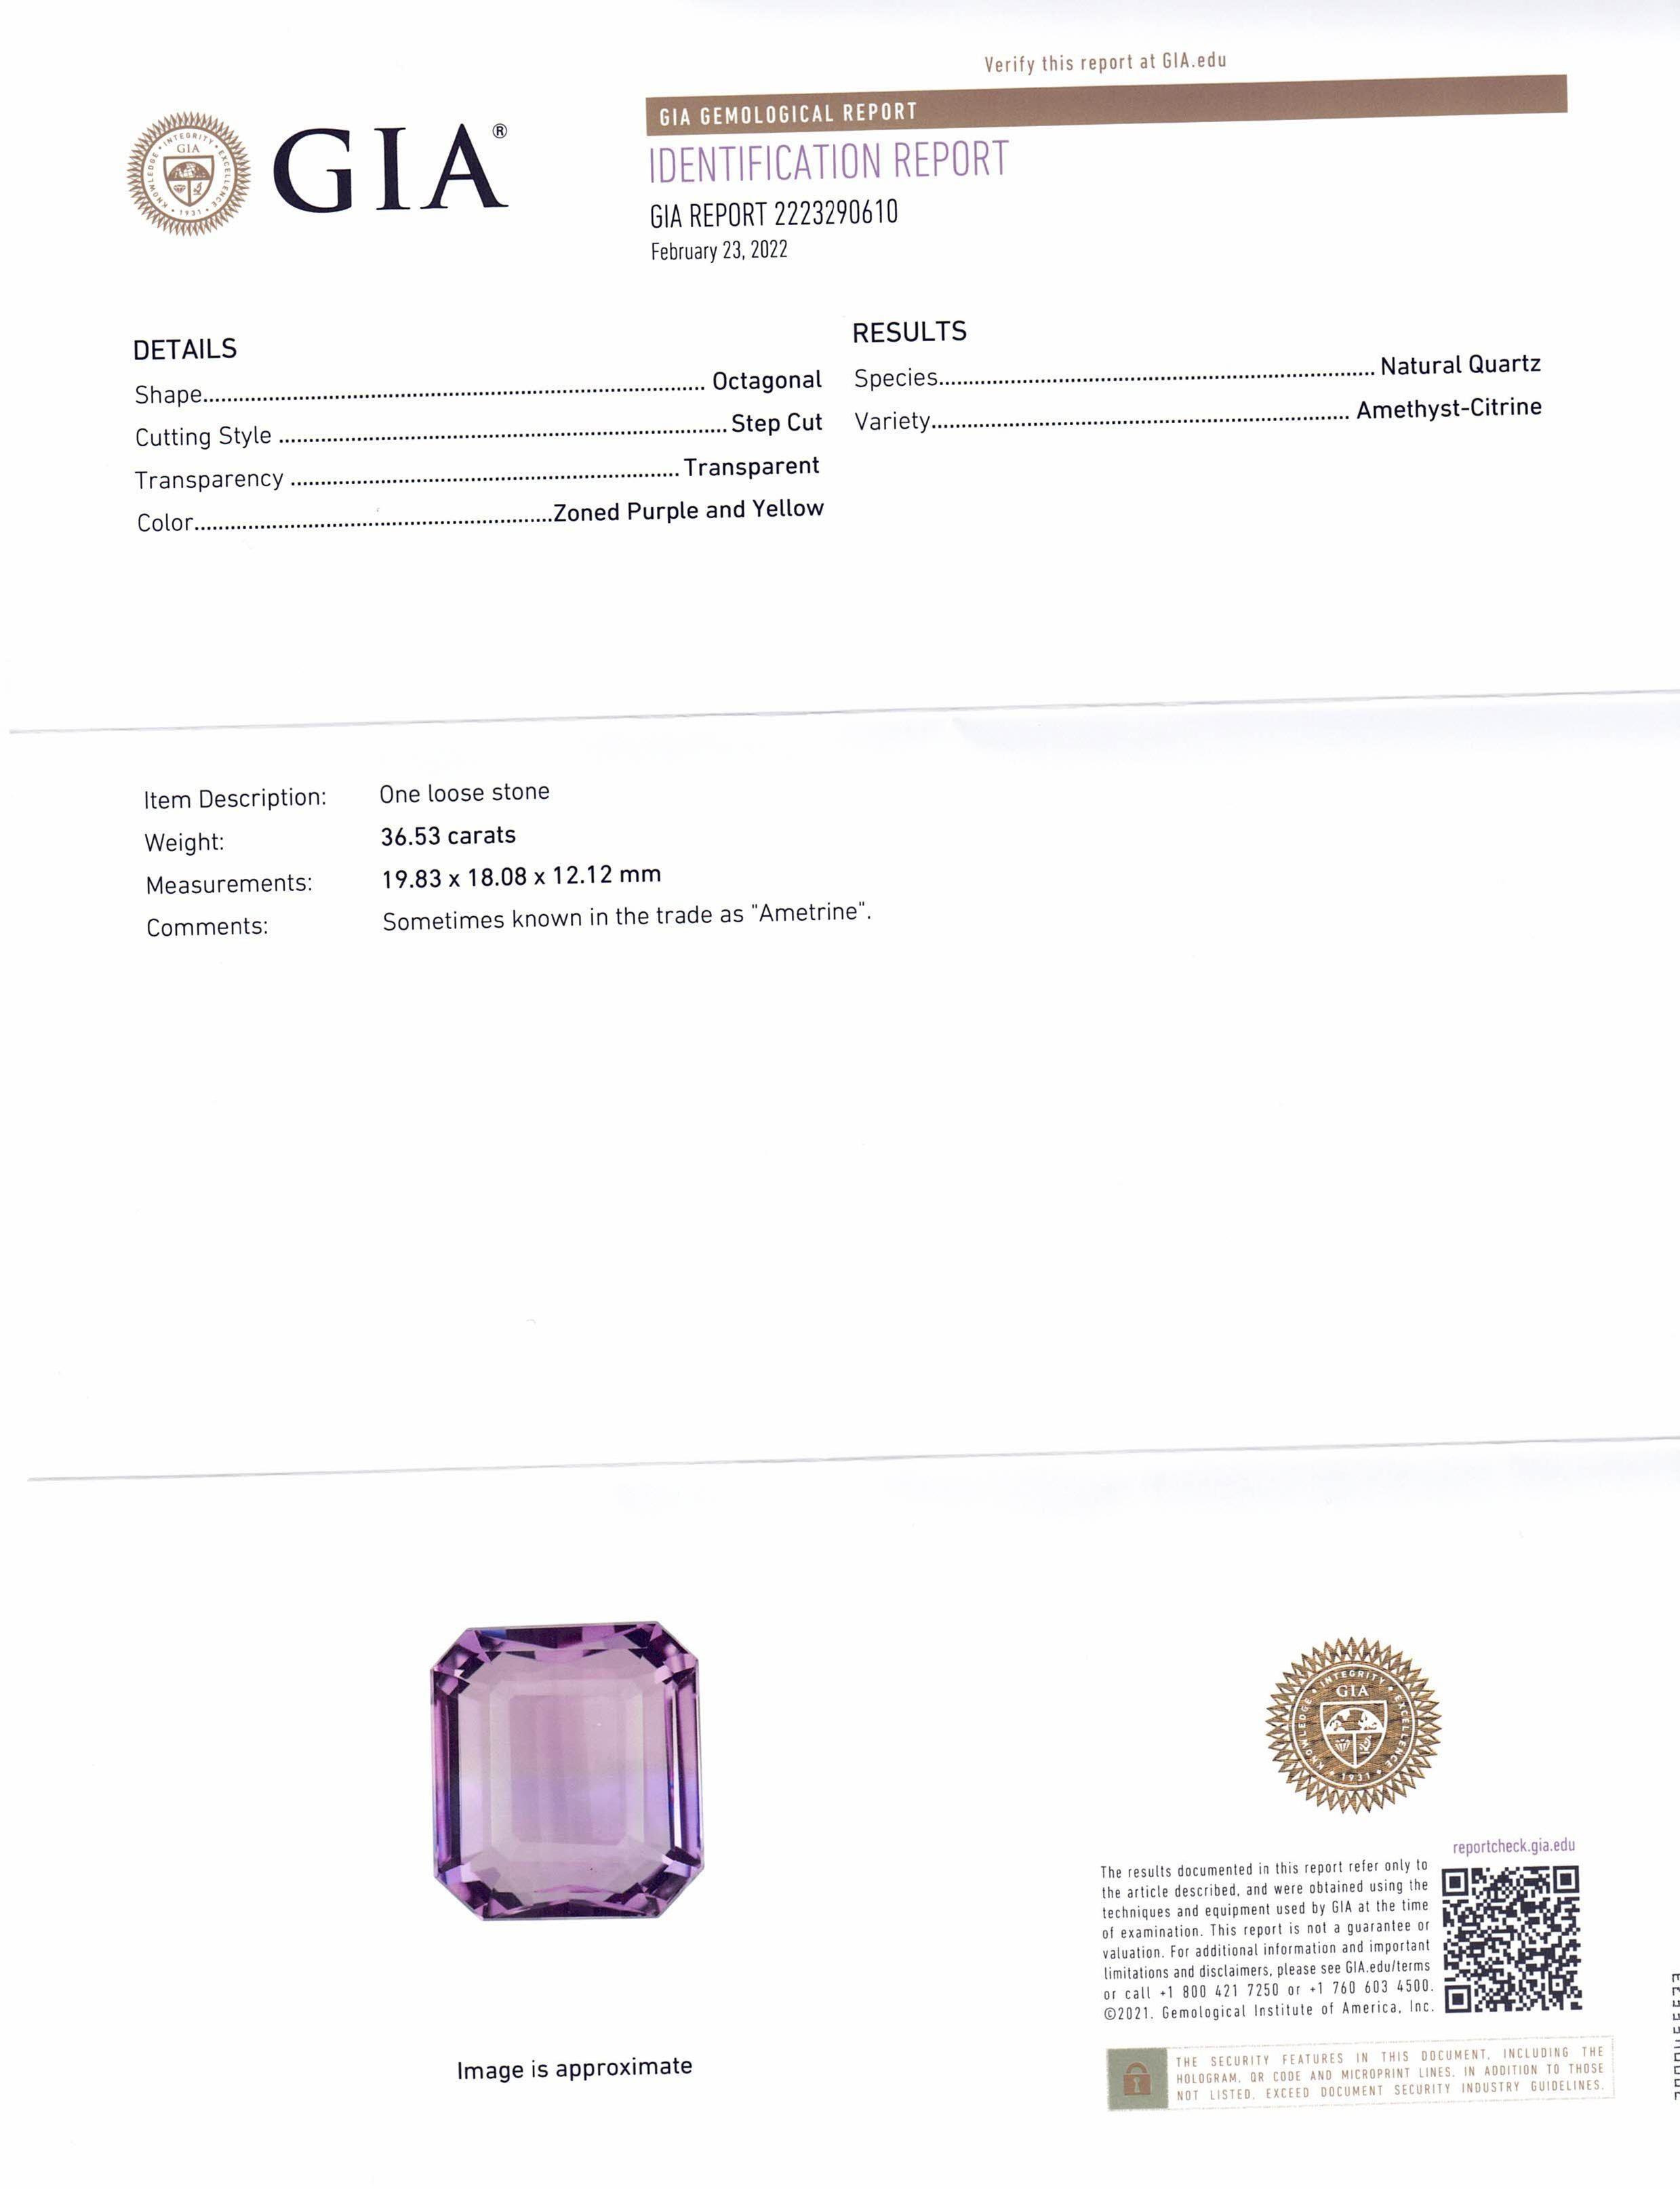 This is a stunning GIA Certified Ametrine

 

The GIA report reads as follows:

 

GIA Report Number: 2223290610
Shape: Octagonal
Cutting Style: Step Cut
Cutting Style: Crown:
Cutting Style: Pavilion:
Transparency: Transparent
Color: Zoned Purple